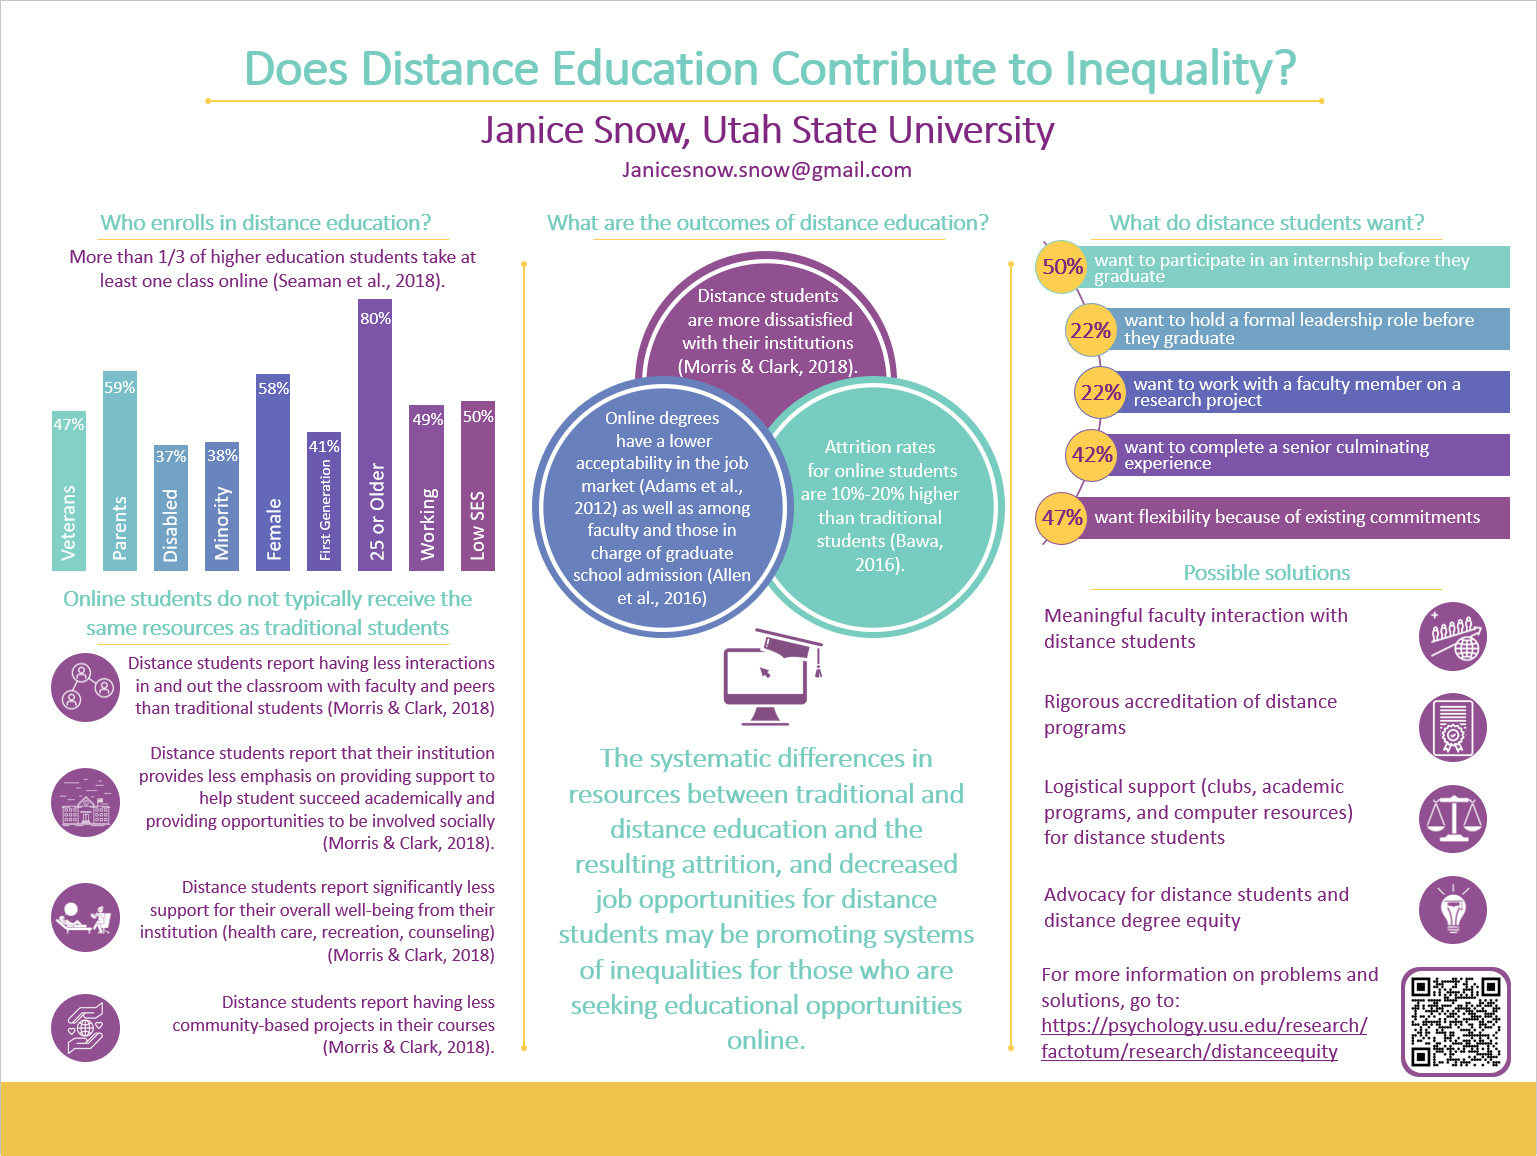 Does Distance Education Contribute to Inequality?